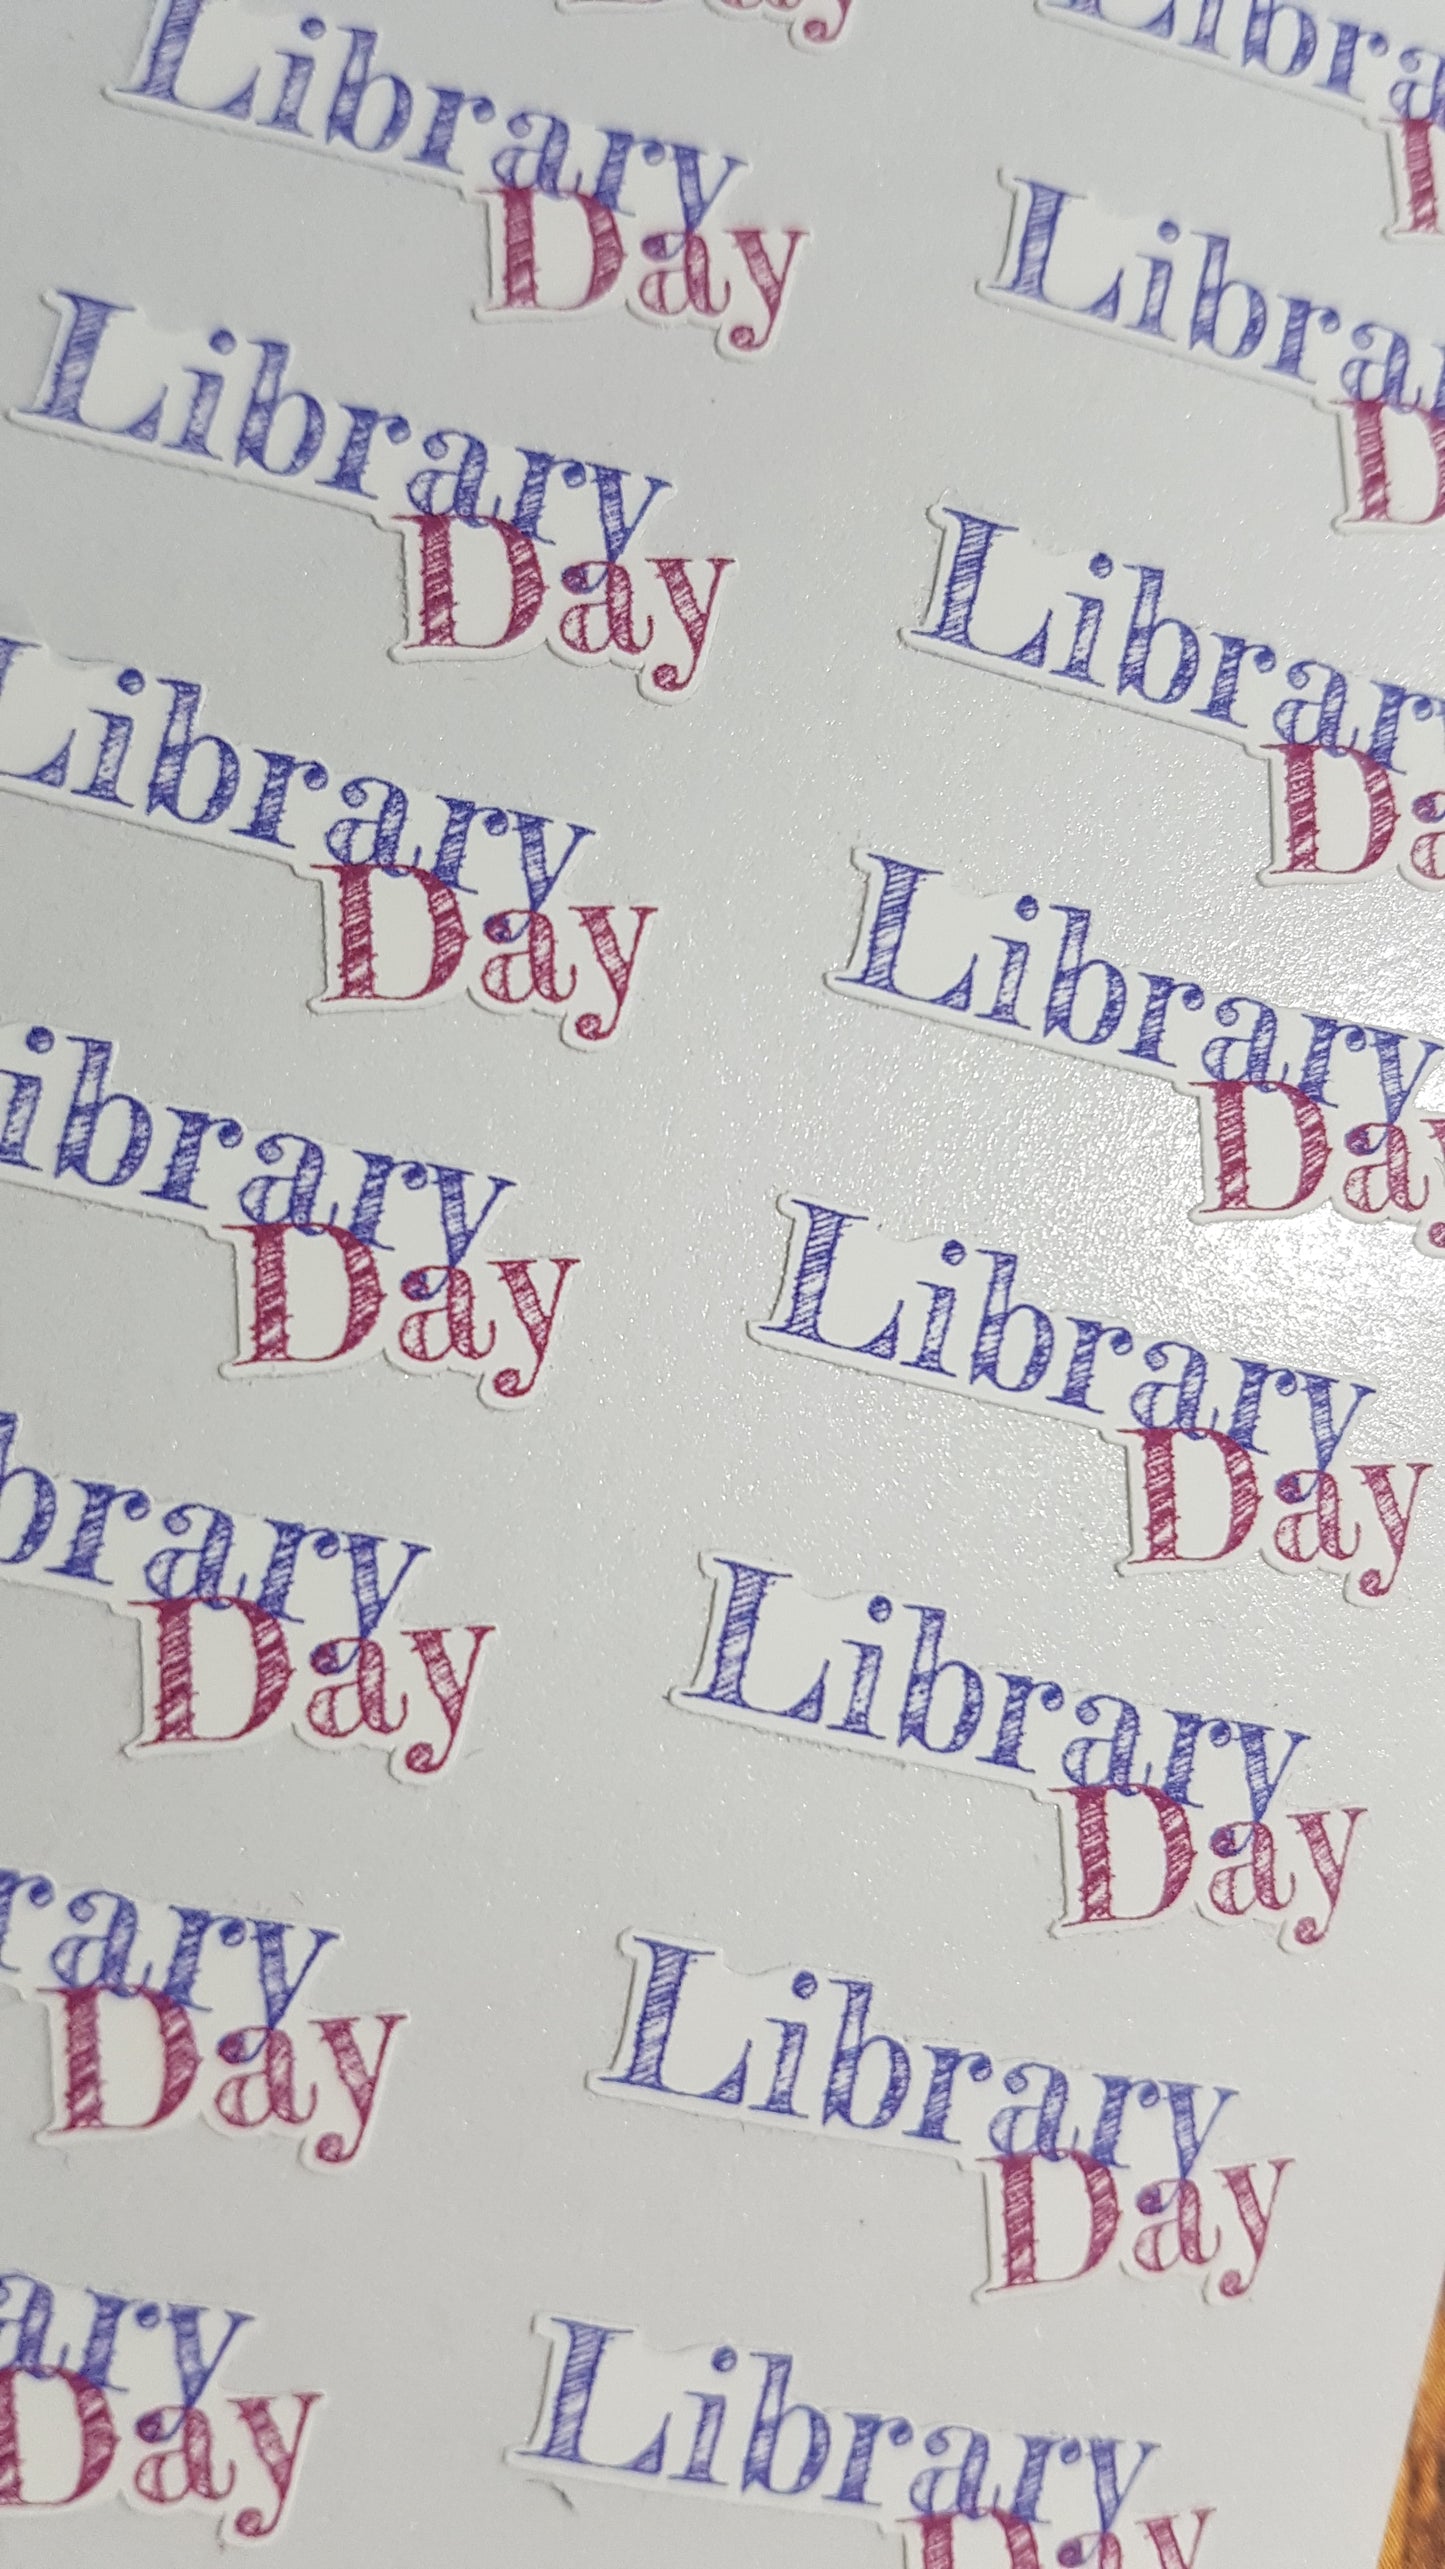 Library Day Doodle Text Stickers